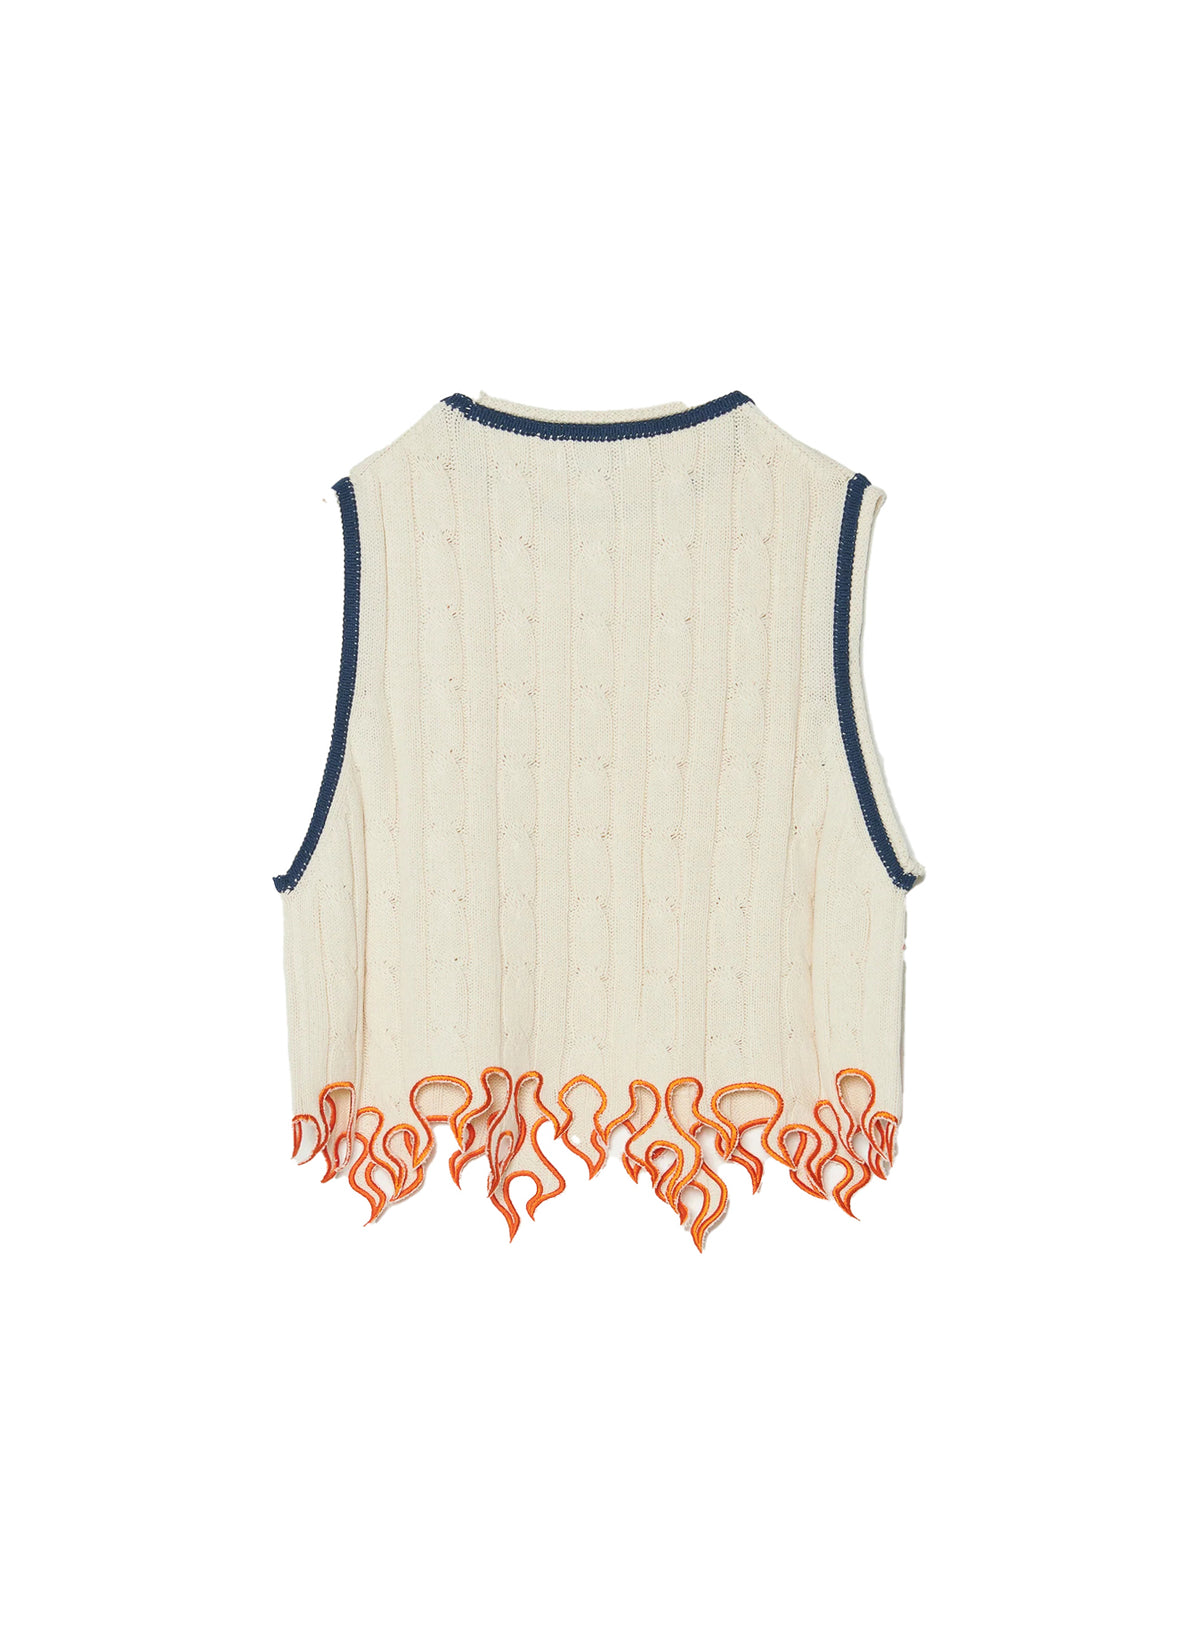 TENDER PERSON / FLAME KNIT VEST WHITE